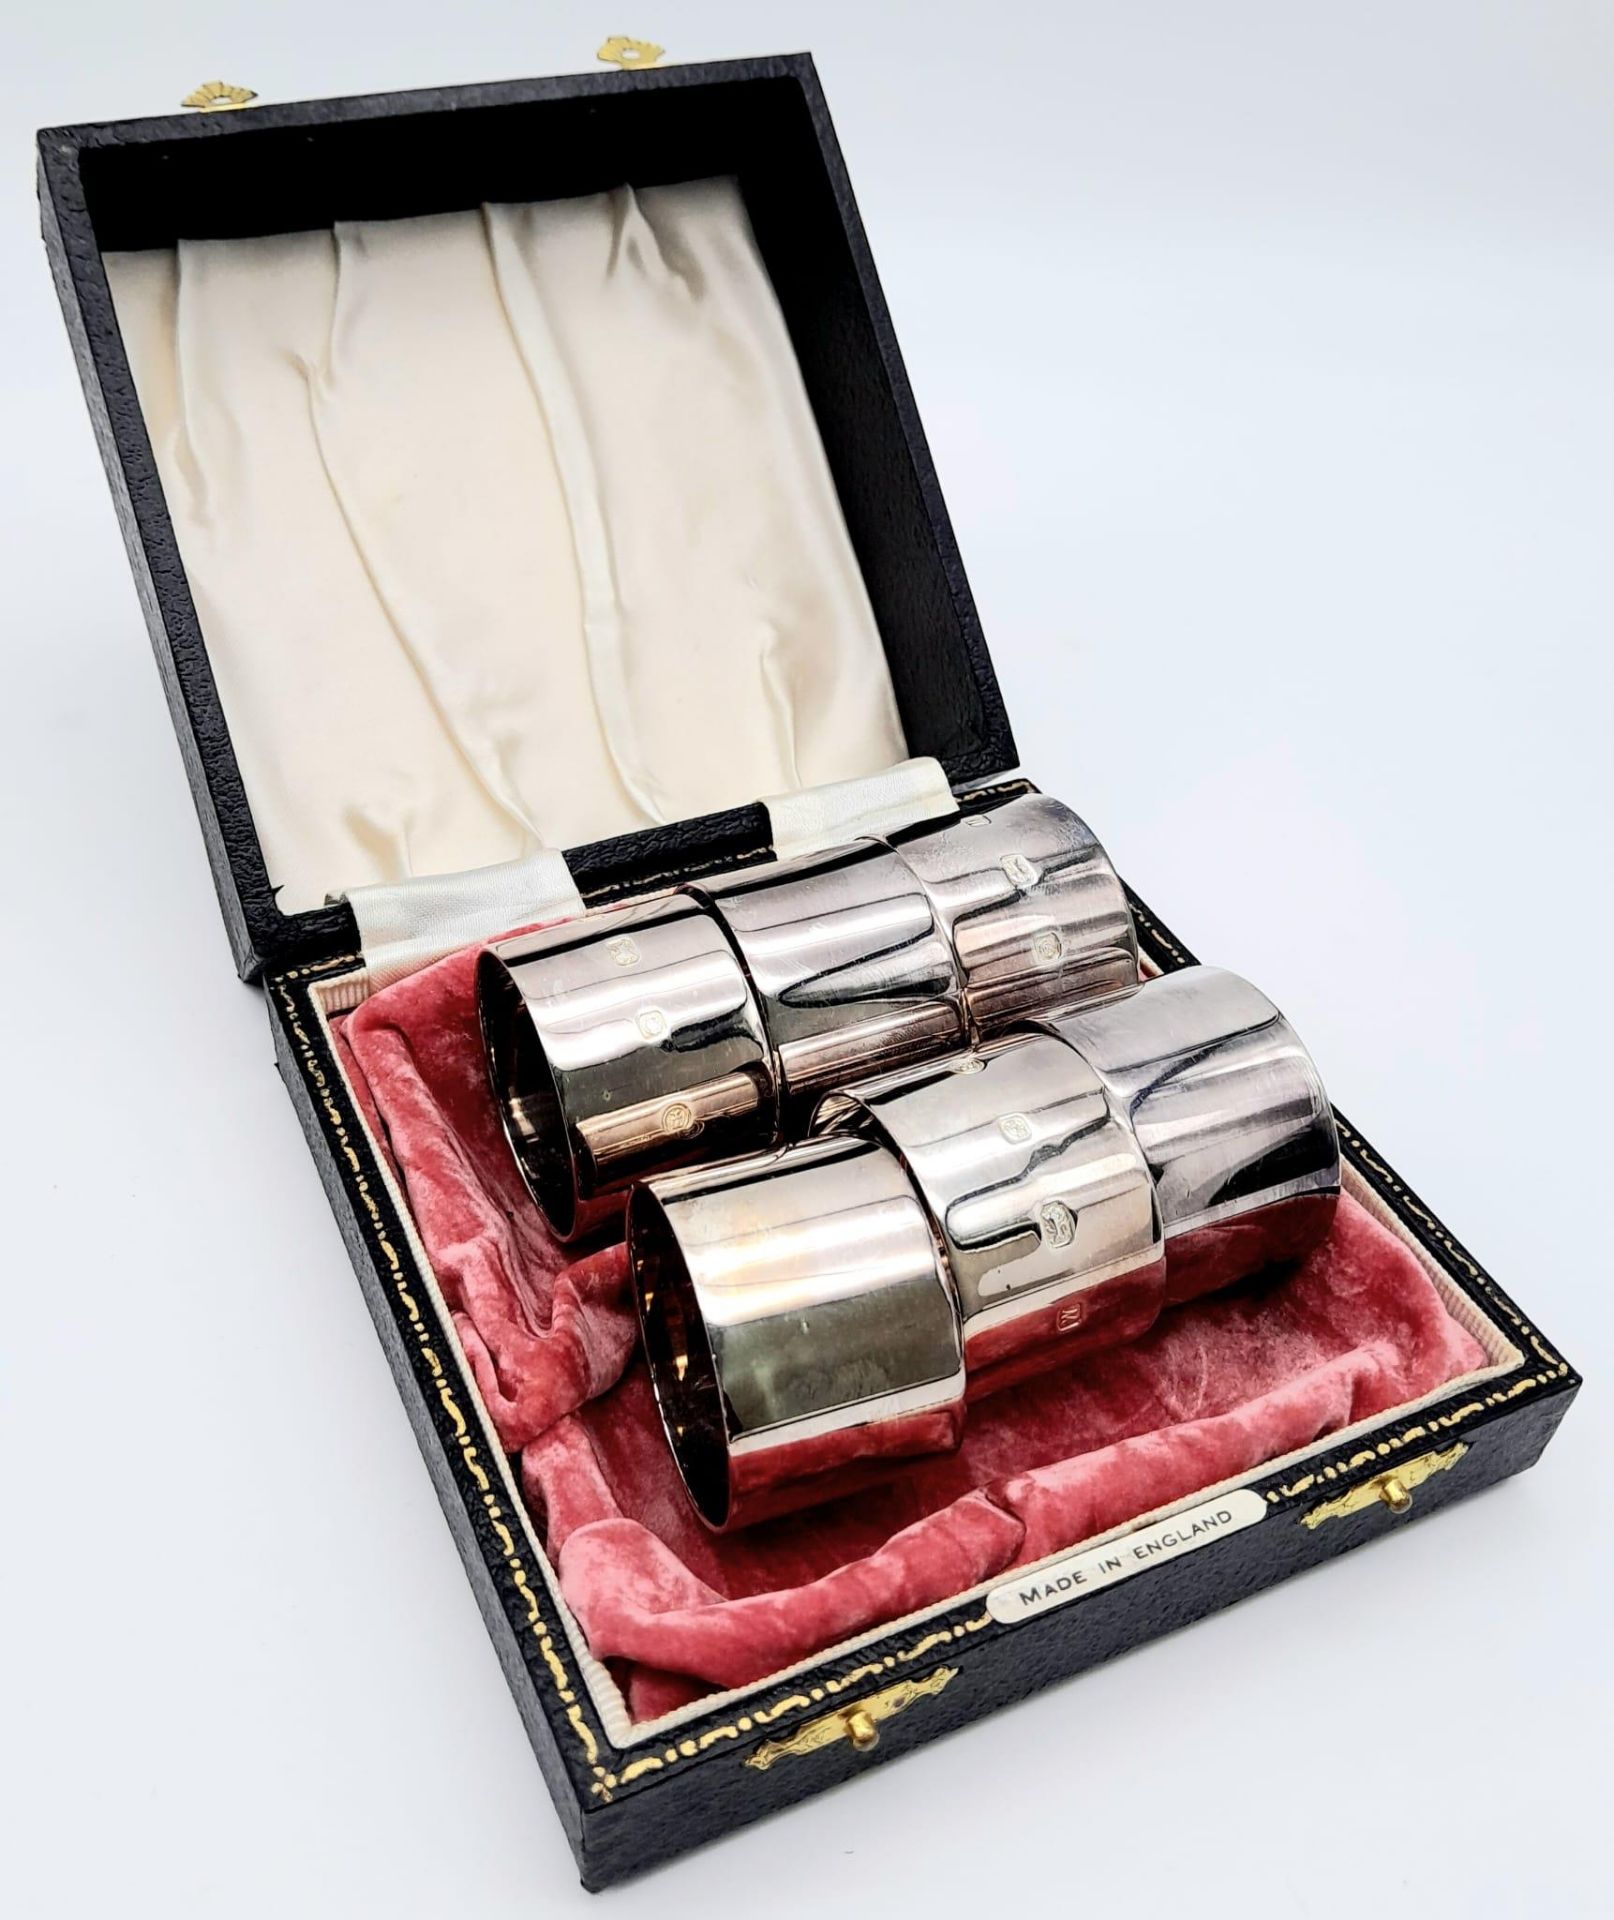 Six 925 Sterling Silver Napkin Rings - Hallmarks for Sheffield 1986. 219g total weight. Comes with a